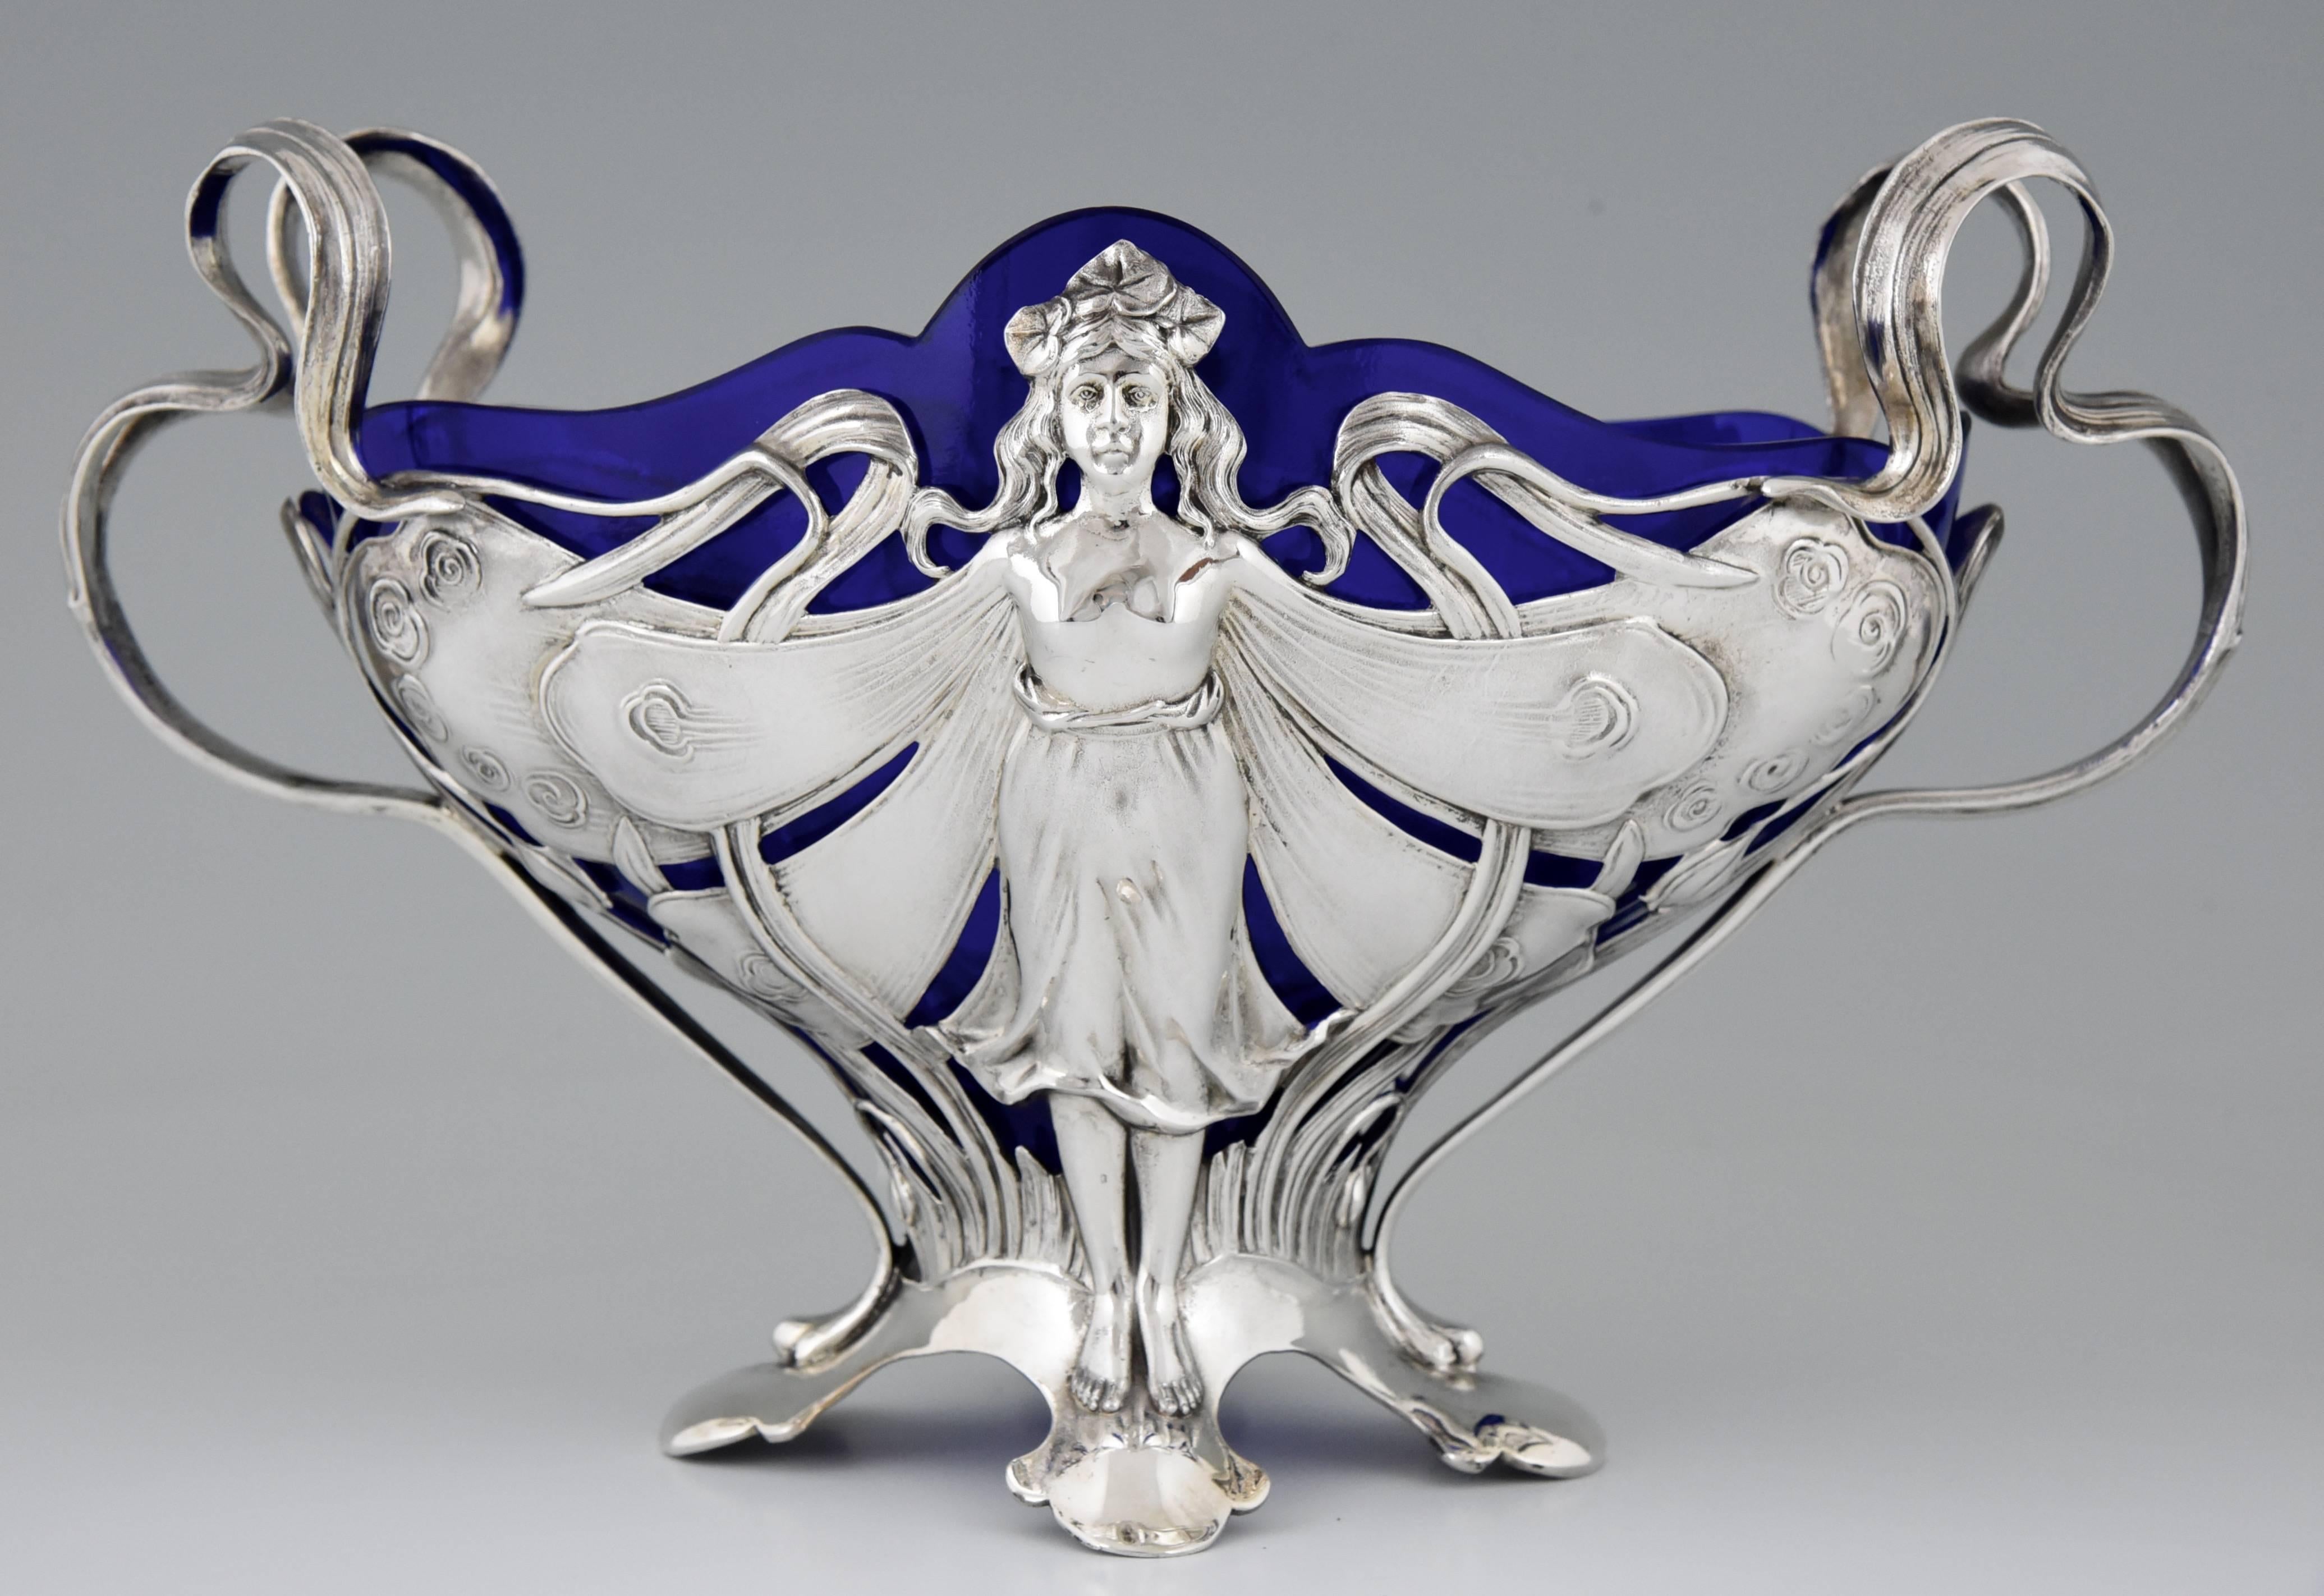 An Art Nouveau flower dish with butterfly lady and blue glass liner.

Stamped WMF mark, 0/1 and B. 

A picture of this model is shown on page xli of the book
”Art nouveau domestic metalwork from Württembergische Metallwaren Fabrik 1906”